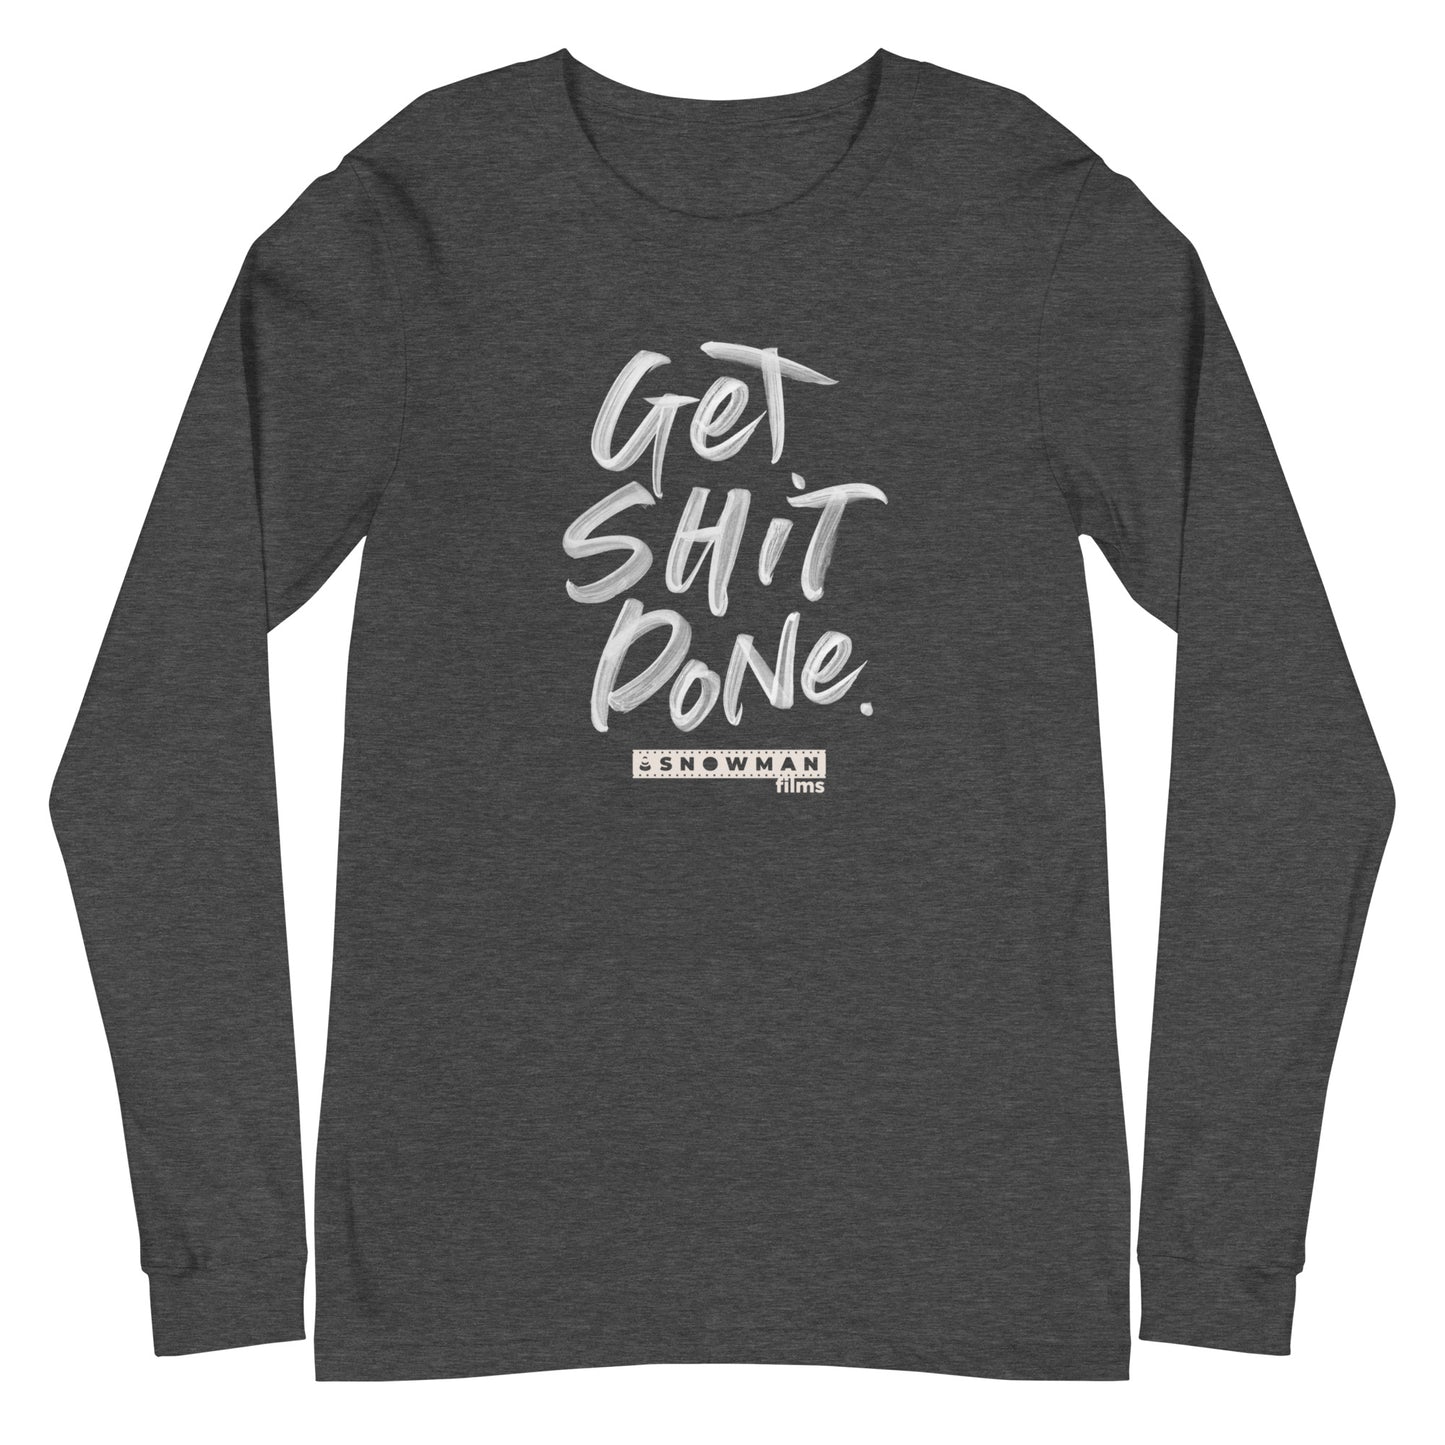 Get Shit Done Long Sleeve Tee